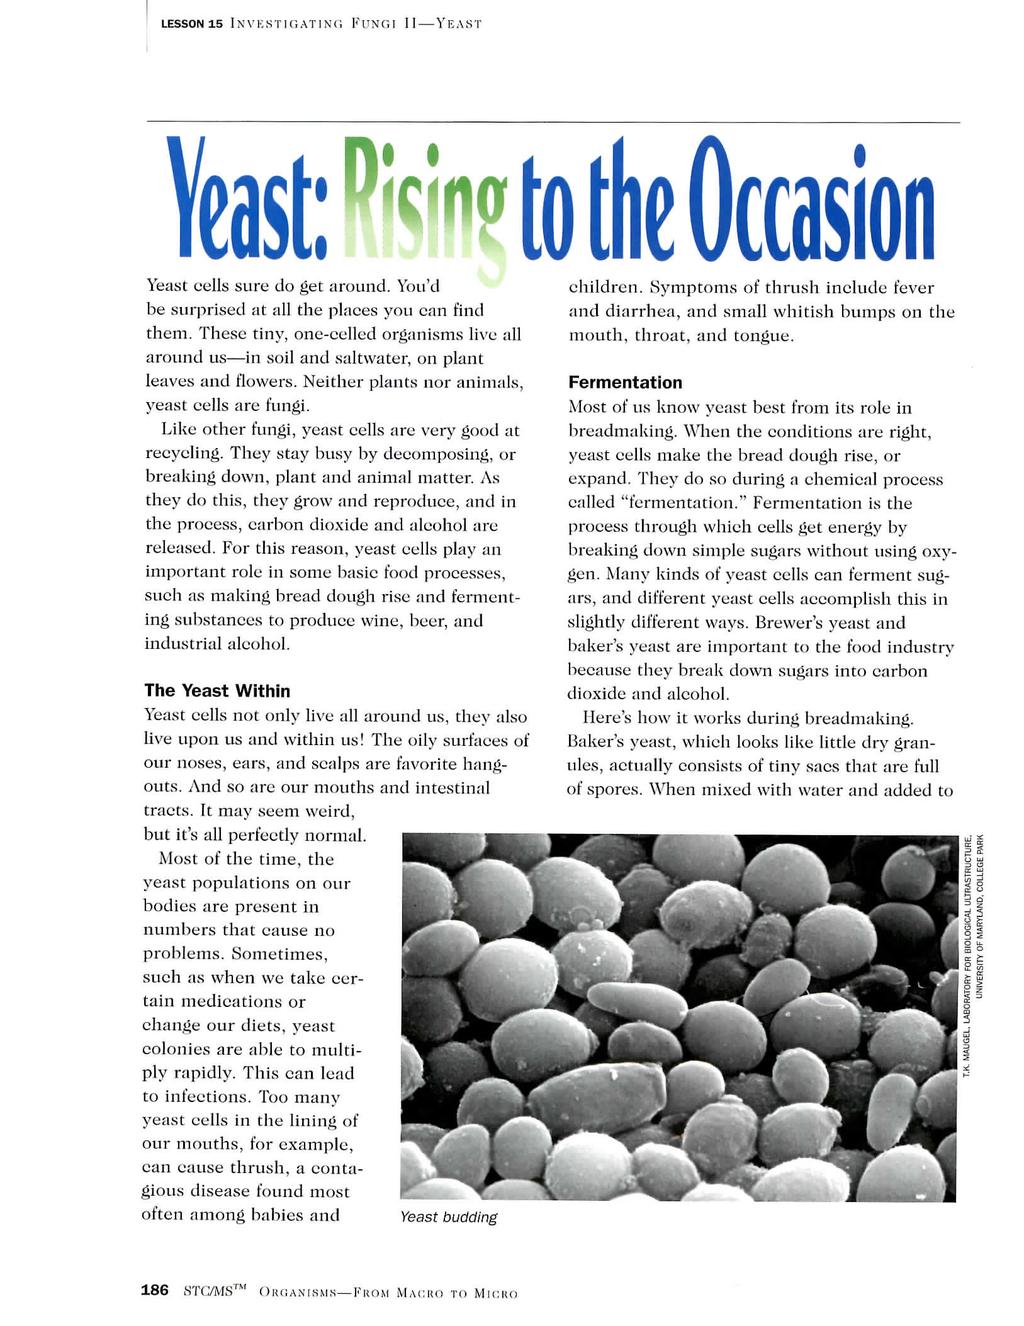 LESSON as INVESTIGATING FUNGI II YEAST to the Occasion Yeast cells sure do get around. You'd be surprised at all the plaees you can find them.